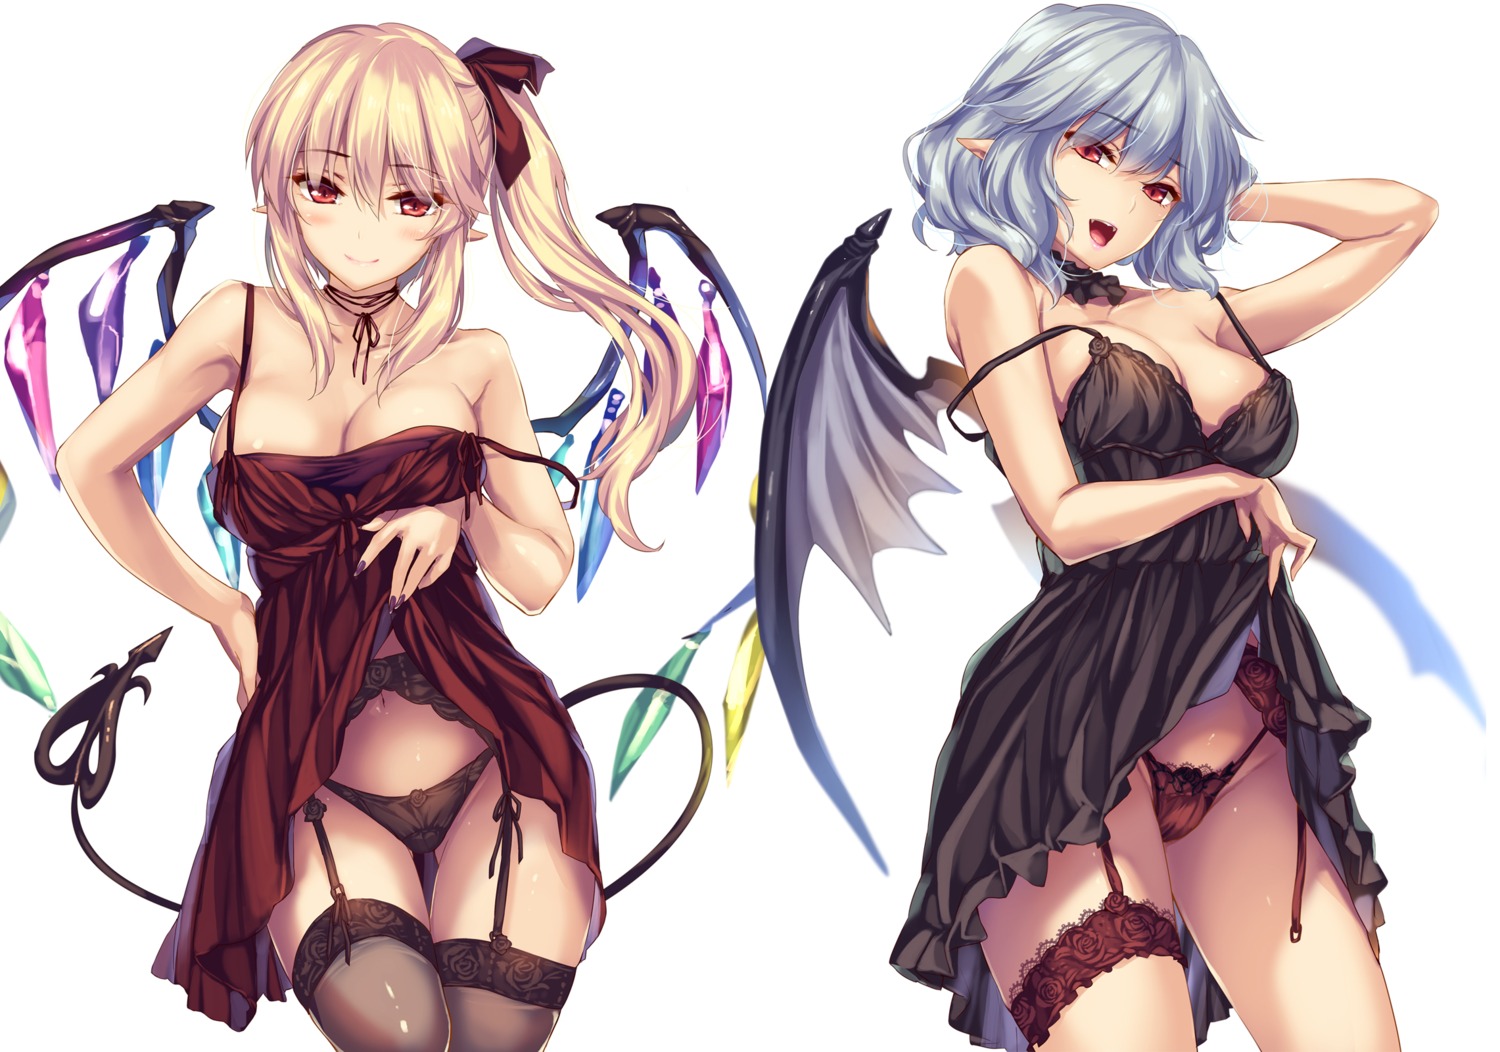 dress flandre_scarlet monety no_bra pantsu pointy_ears remilia_scarlet skirt_lift stockings tail thighhighs touhou wings